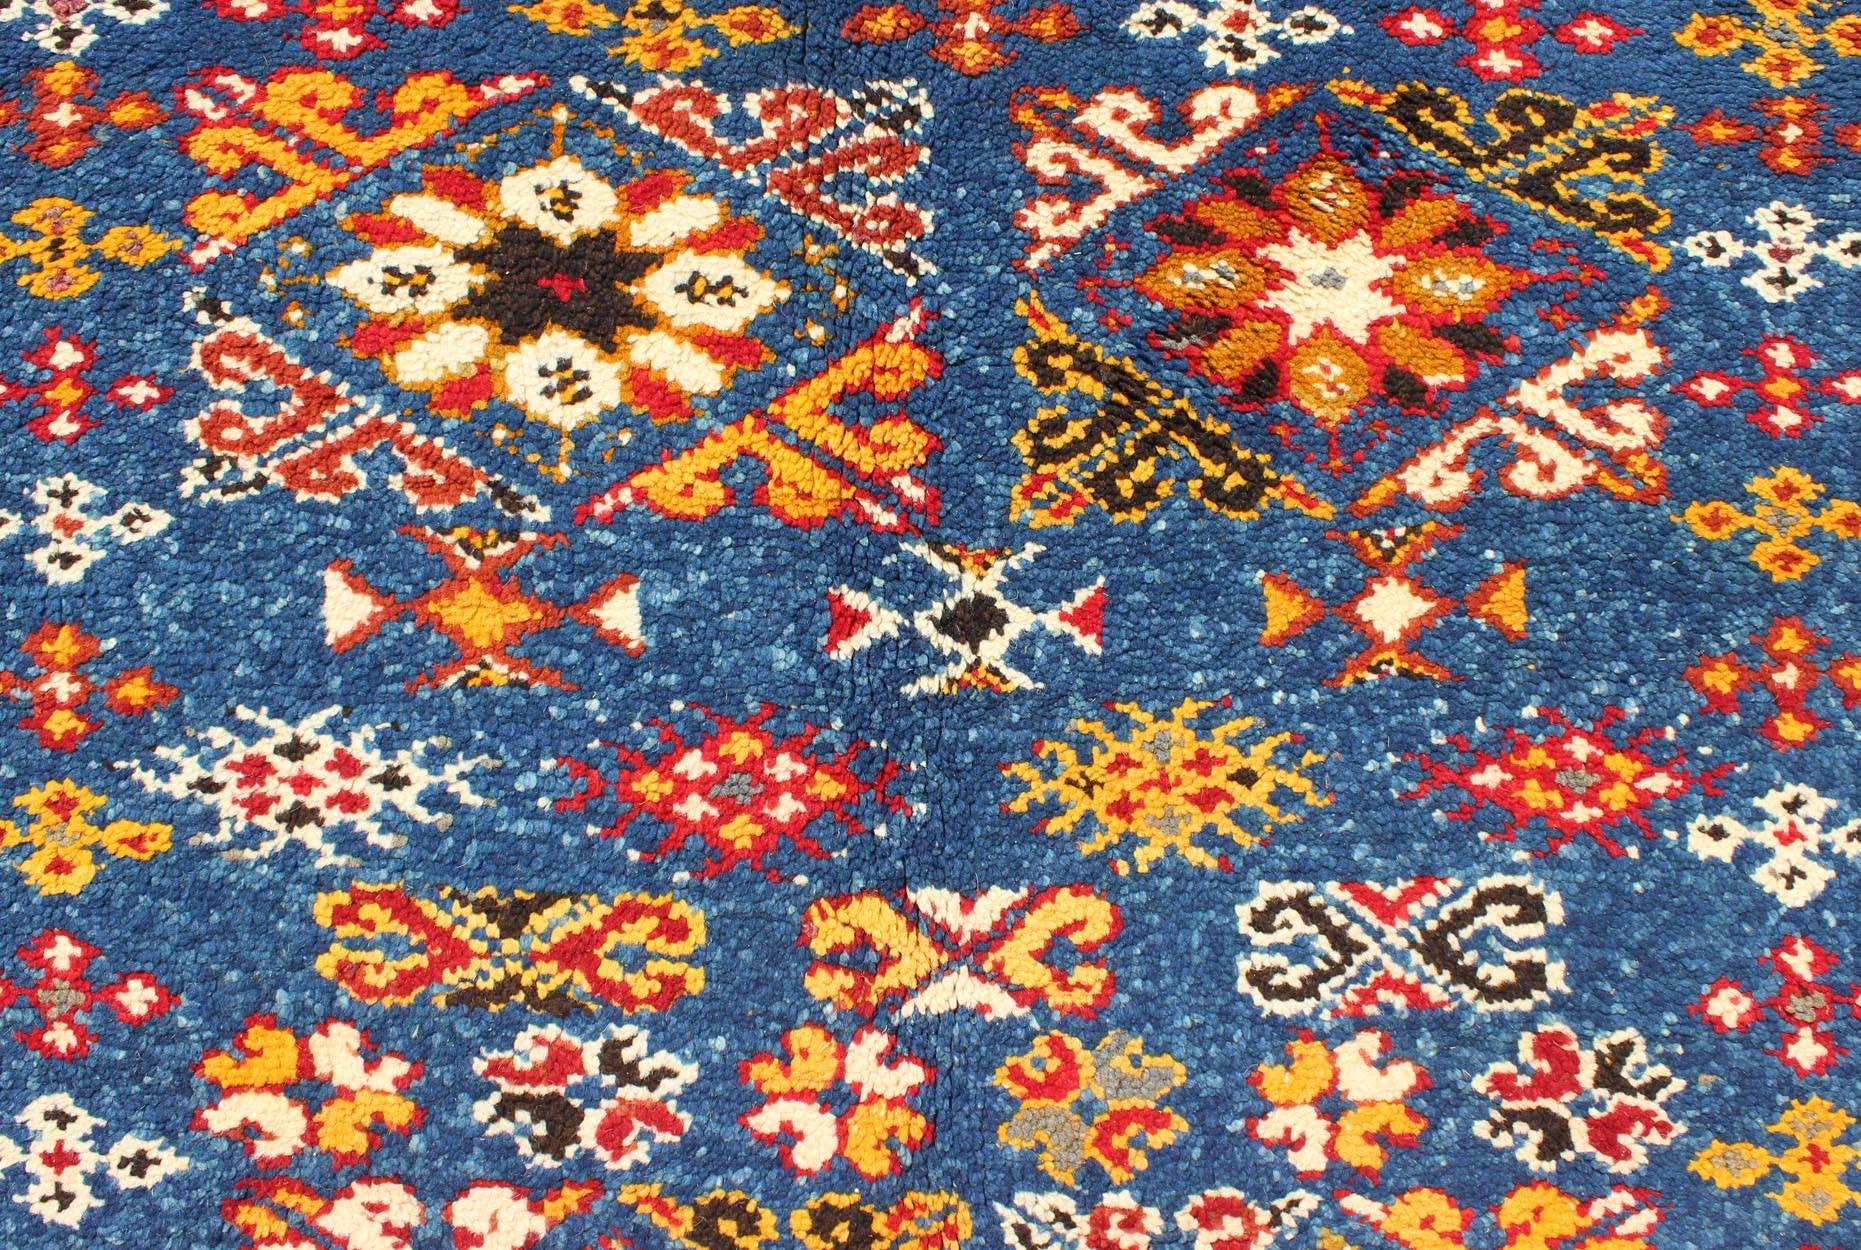 Late 20th Century Vintage Moroccan Rug with Bright Blue Field and Colorful Geometric Motifs